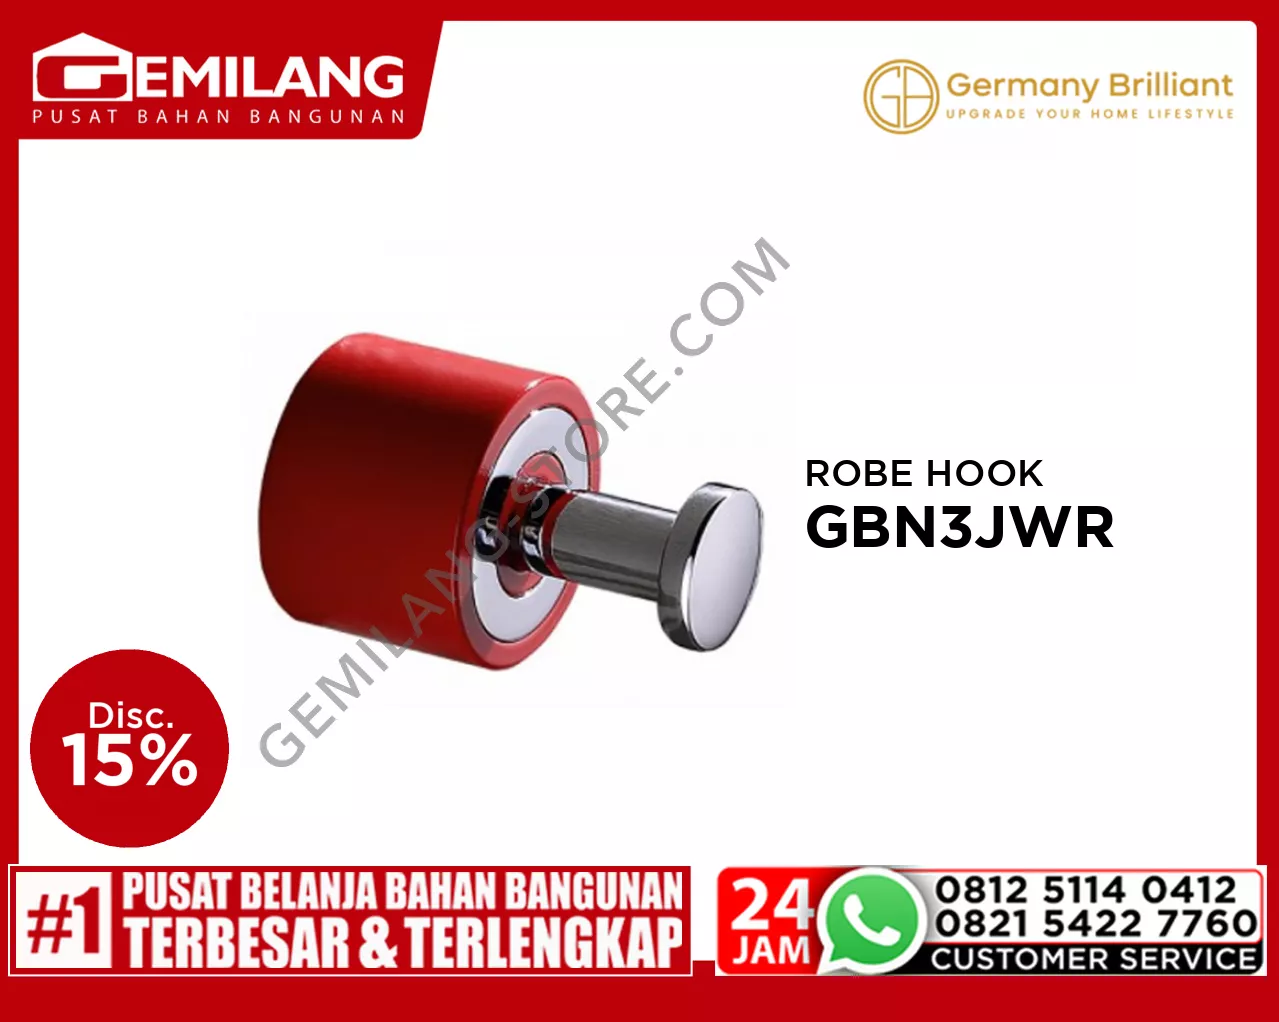 GERMANY BRILLIANT ROBE HOOK GBN3JWR RED